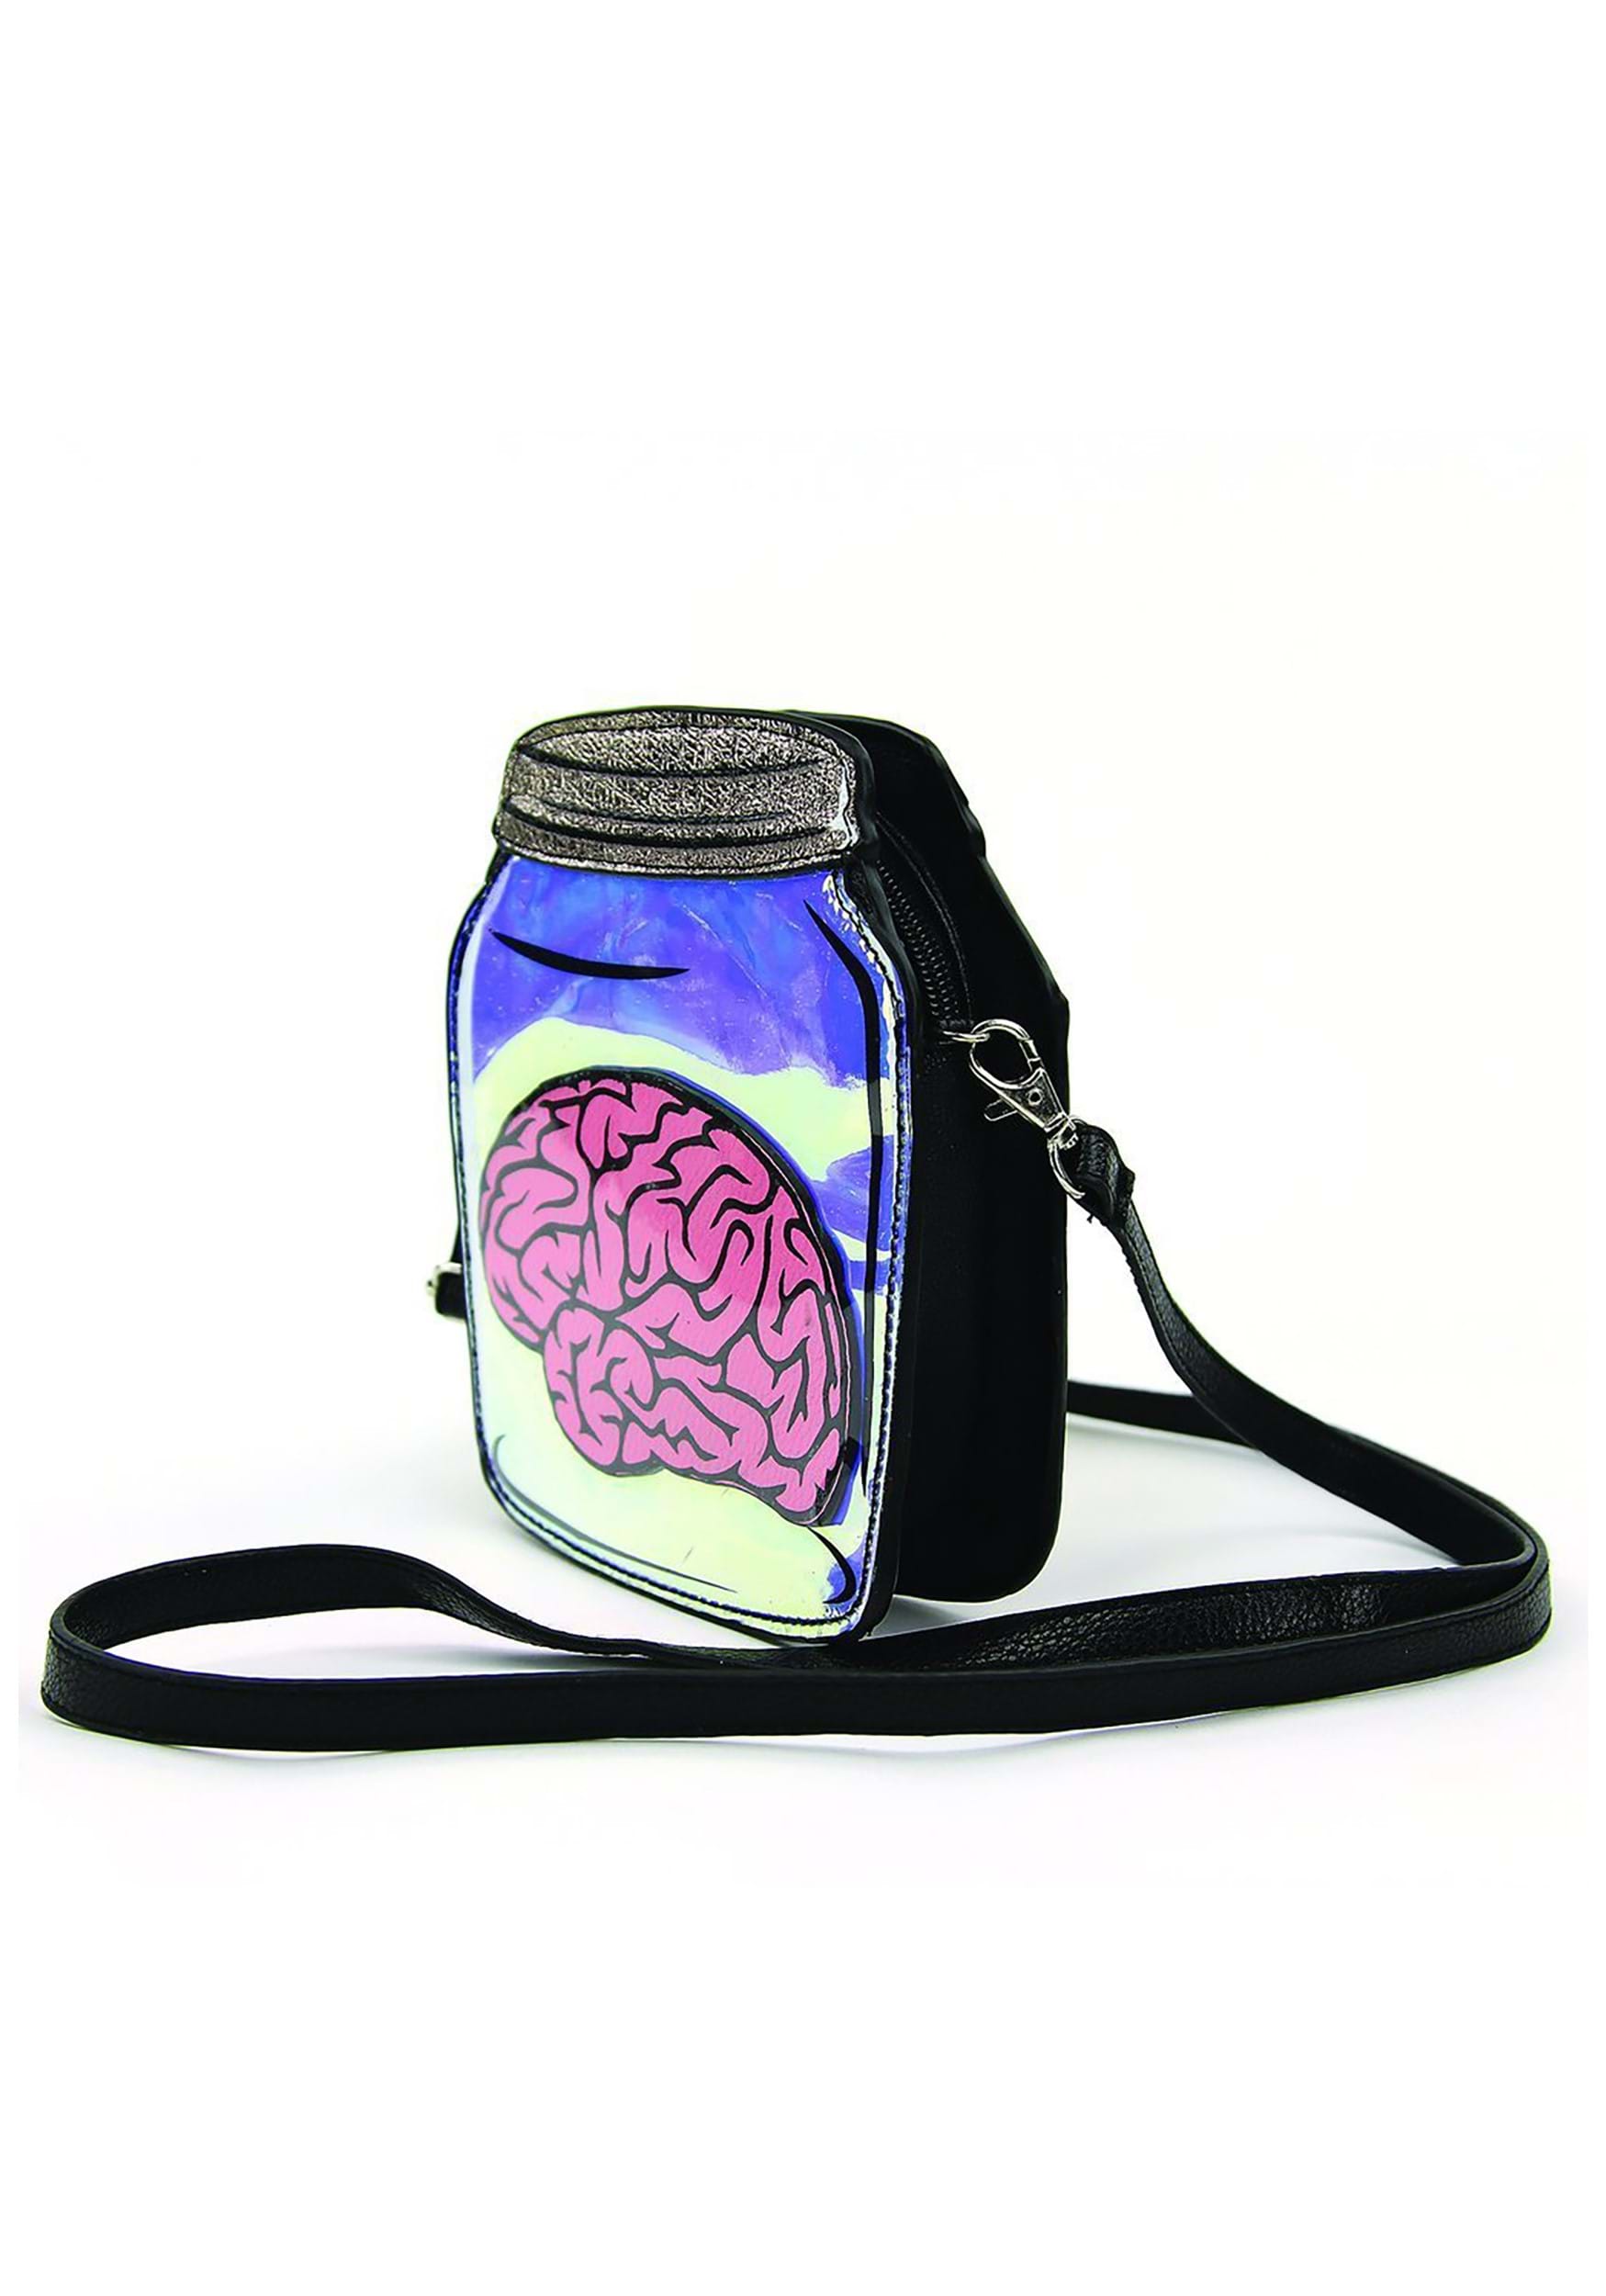 Brain In A Jar Purse For Adults